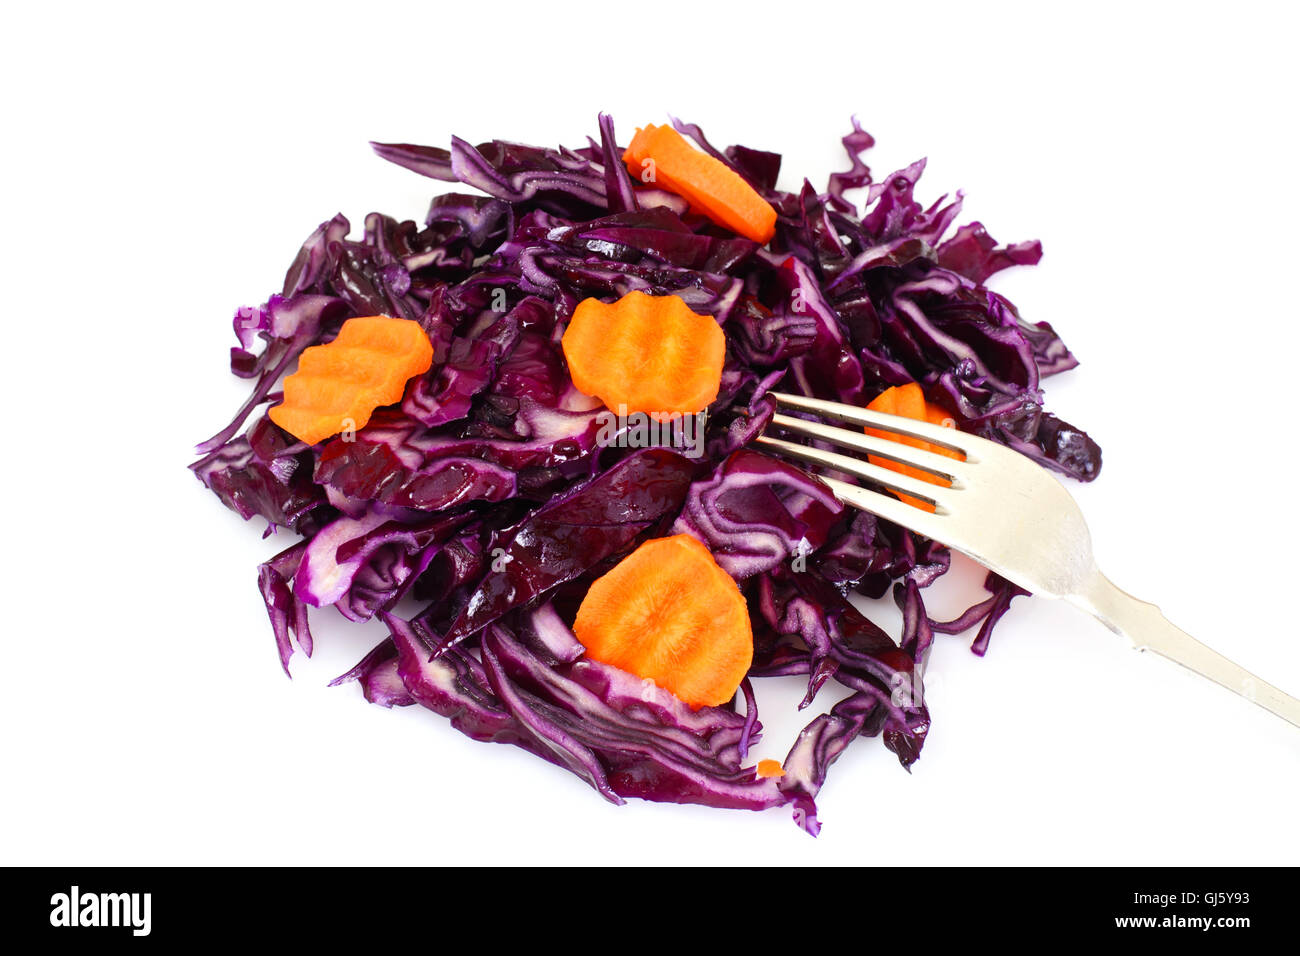 Salad of Red Cabbage with Vegetable Oil. Diet Food Stock Photo